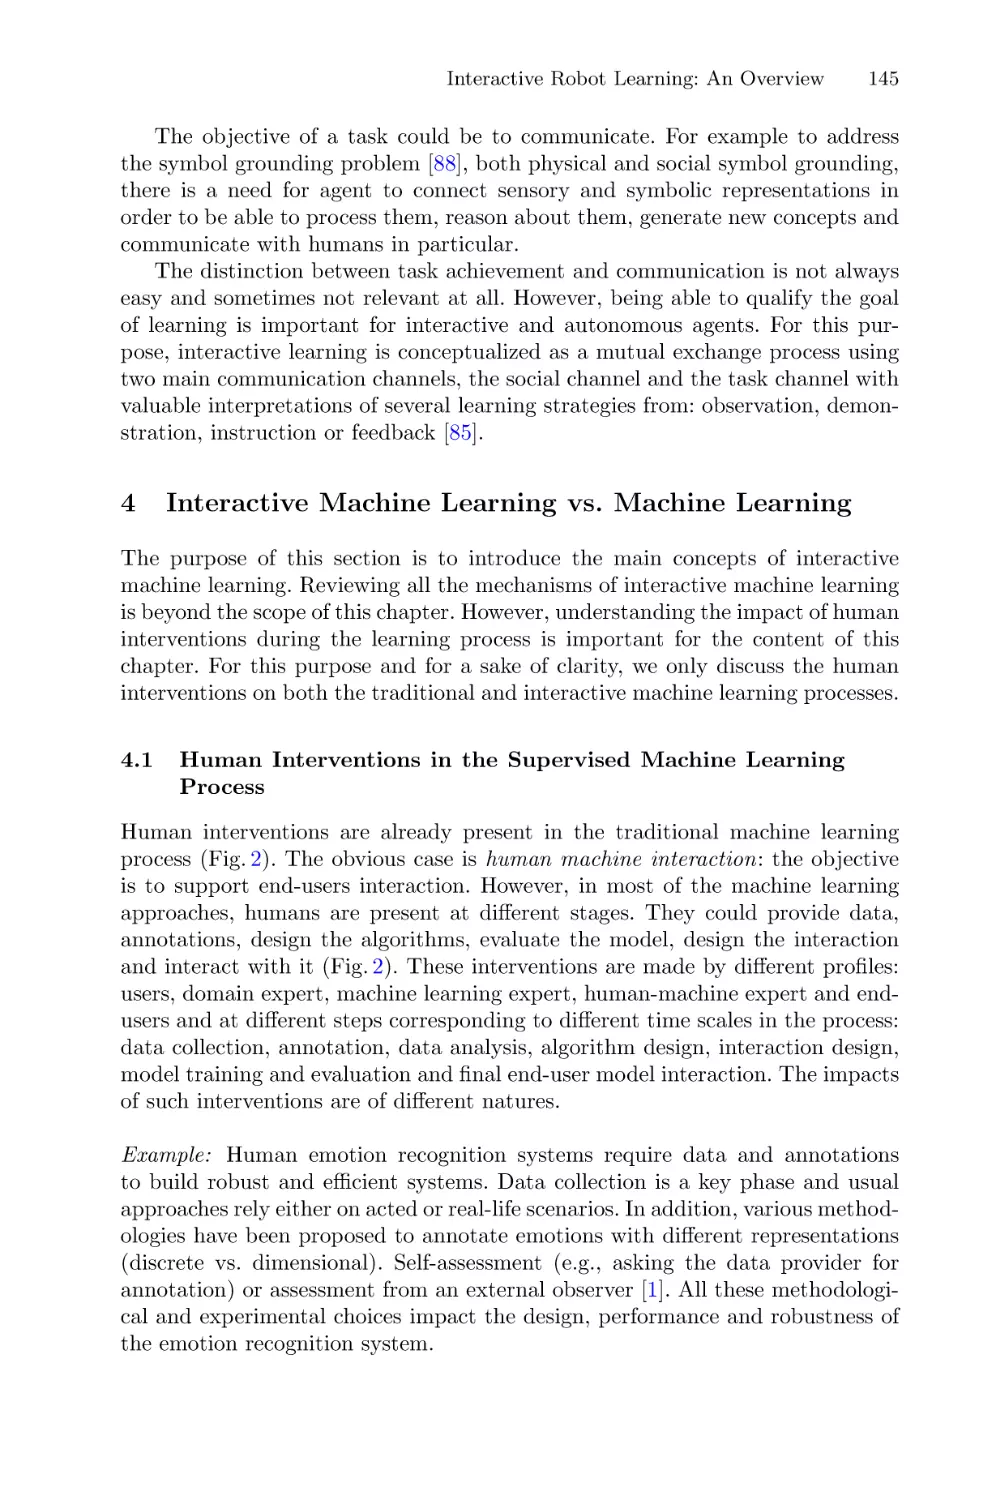 4 Interactive Machine Learning vs. Machine Learning
4.1 Human Interventions in the Supervised Machine Learning Process